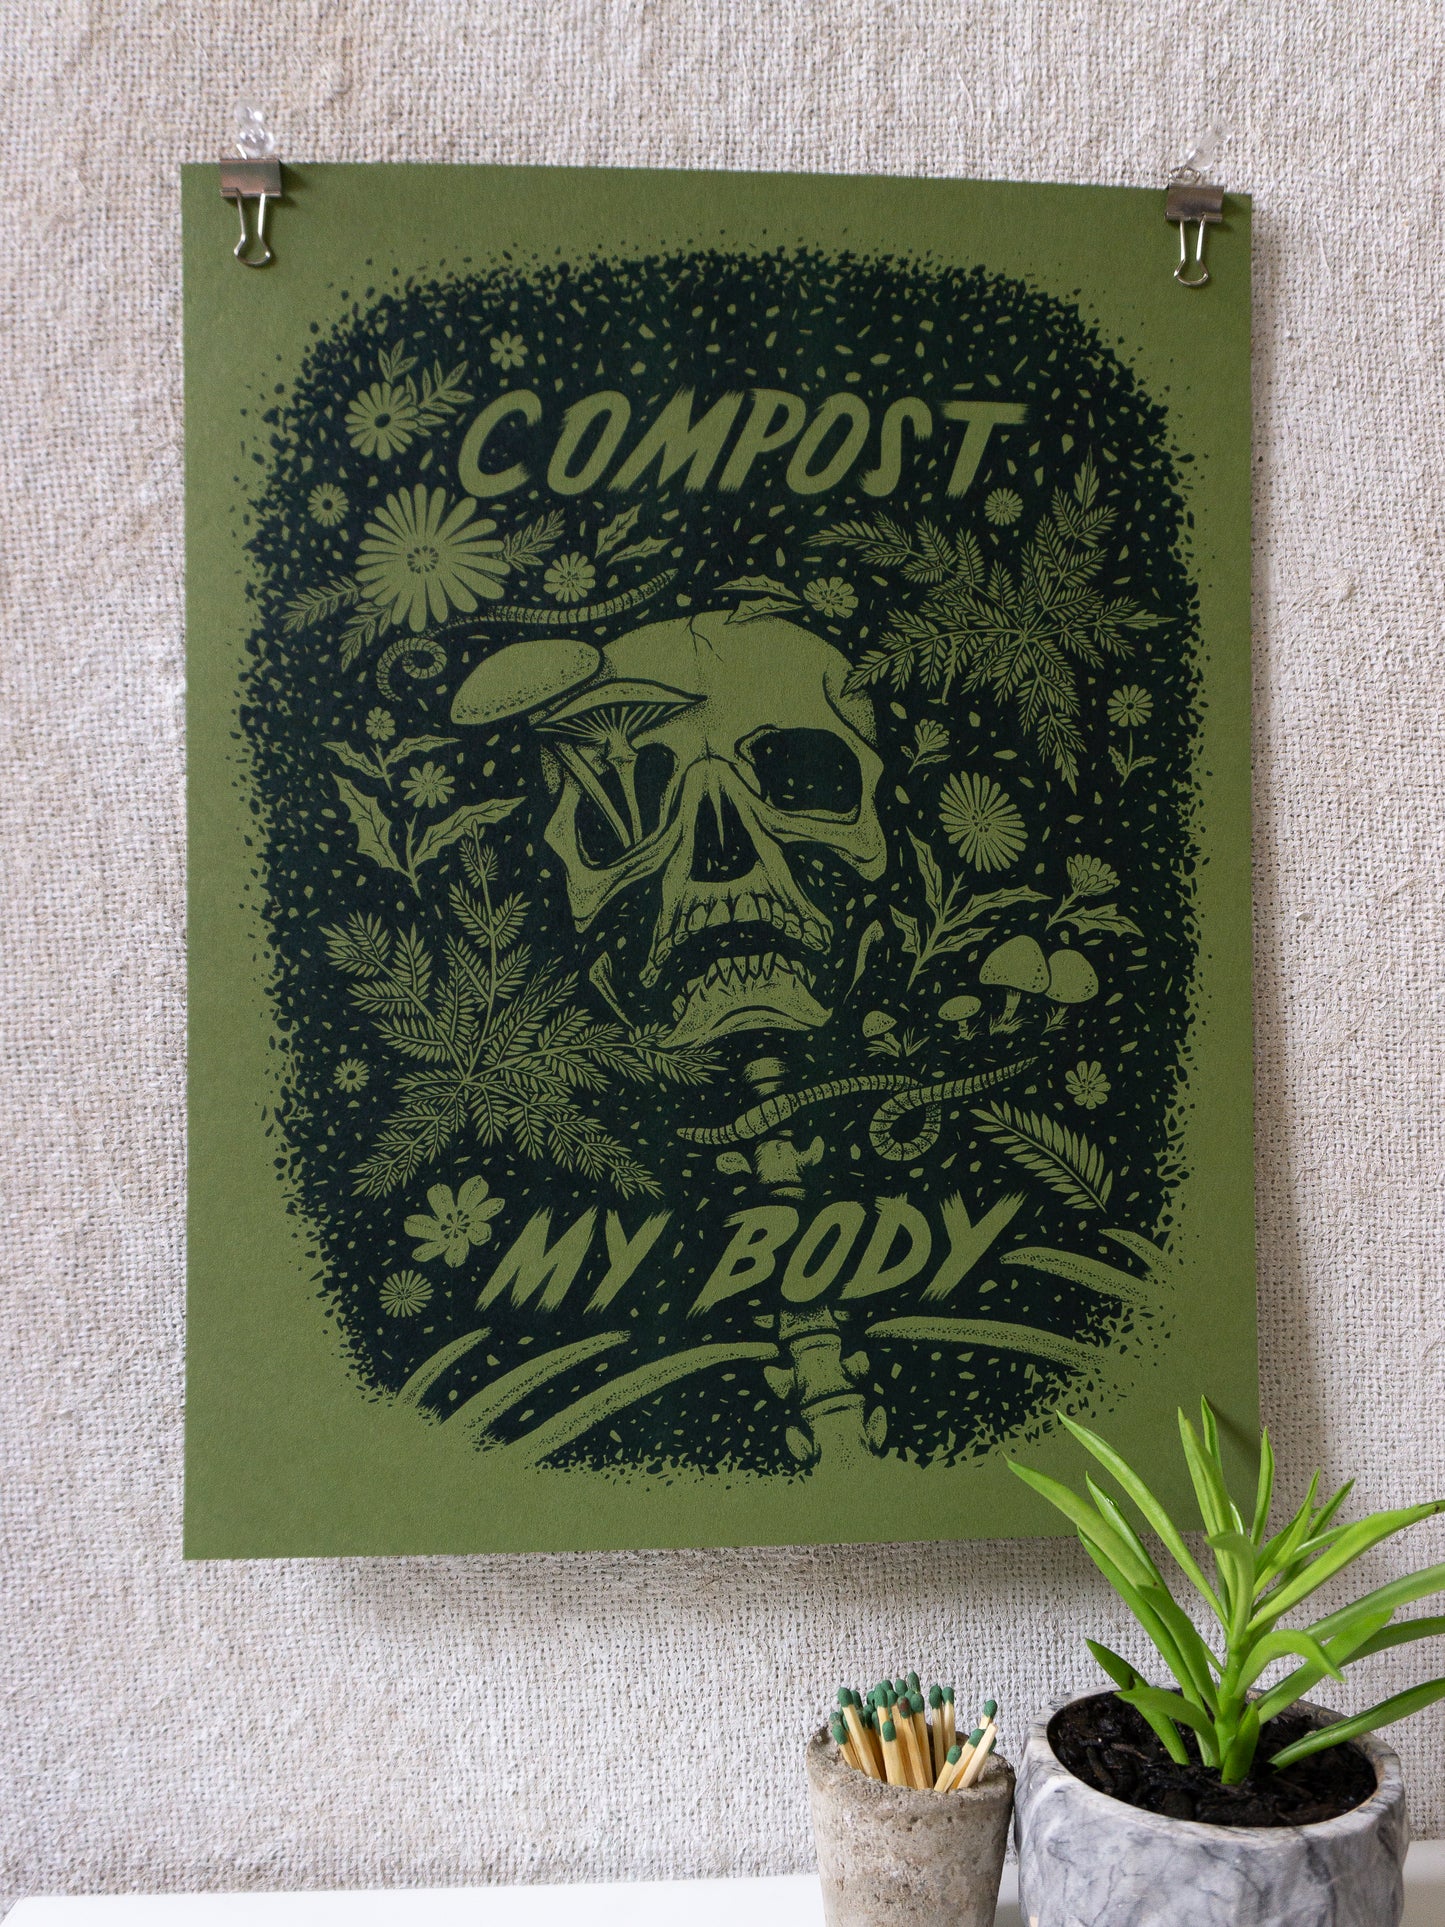 Compost My Body